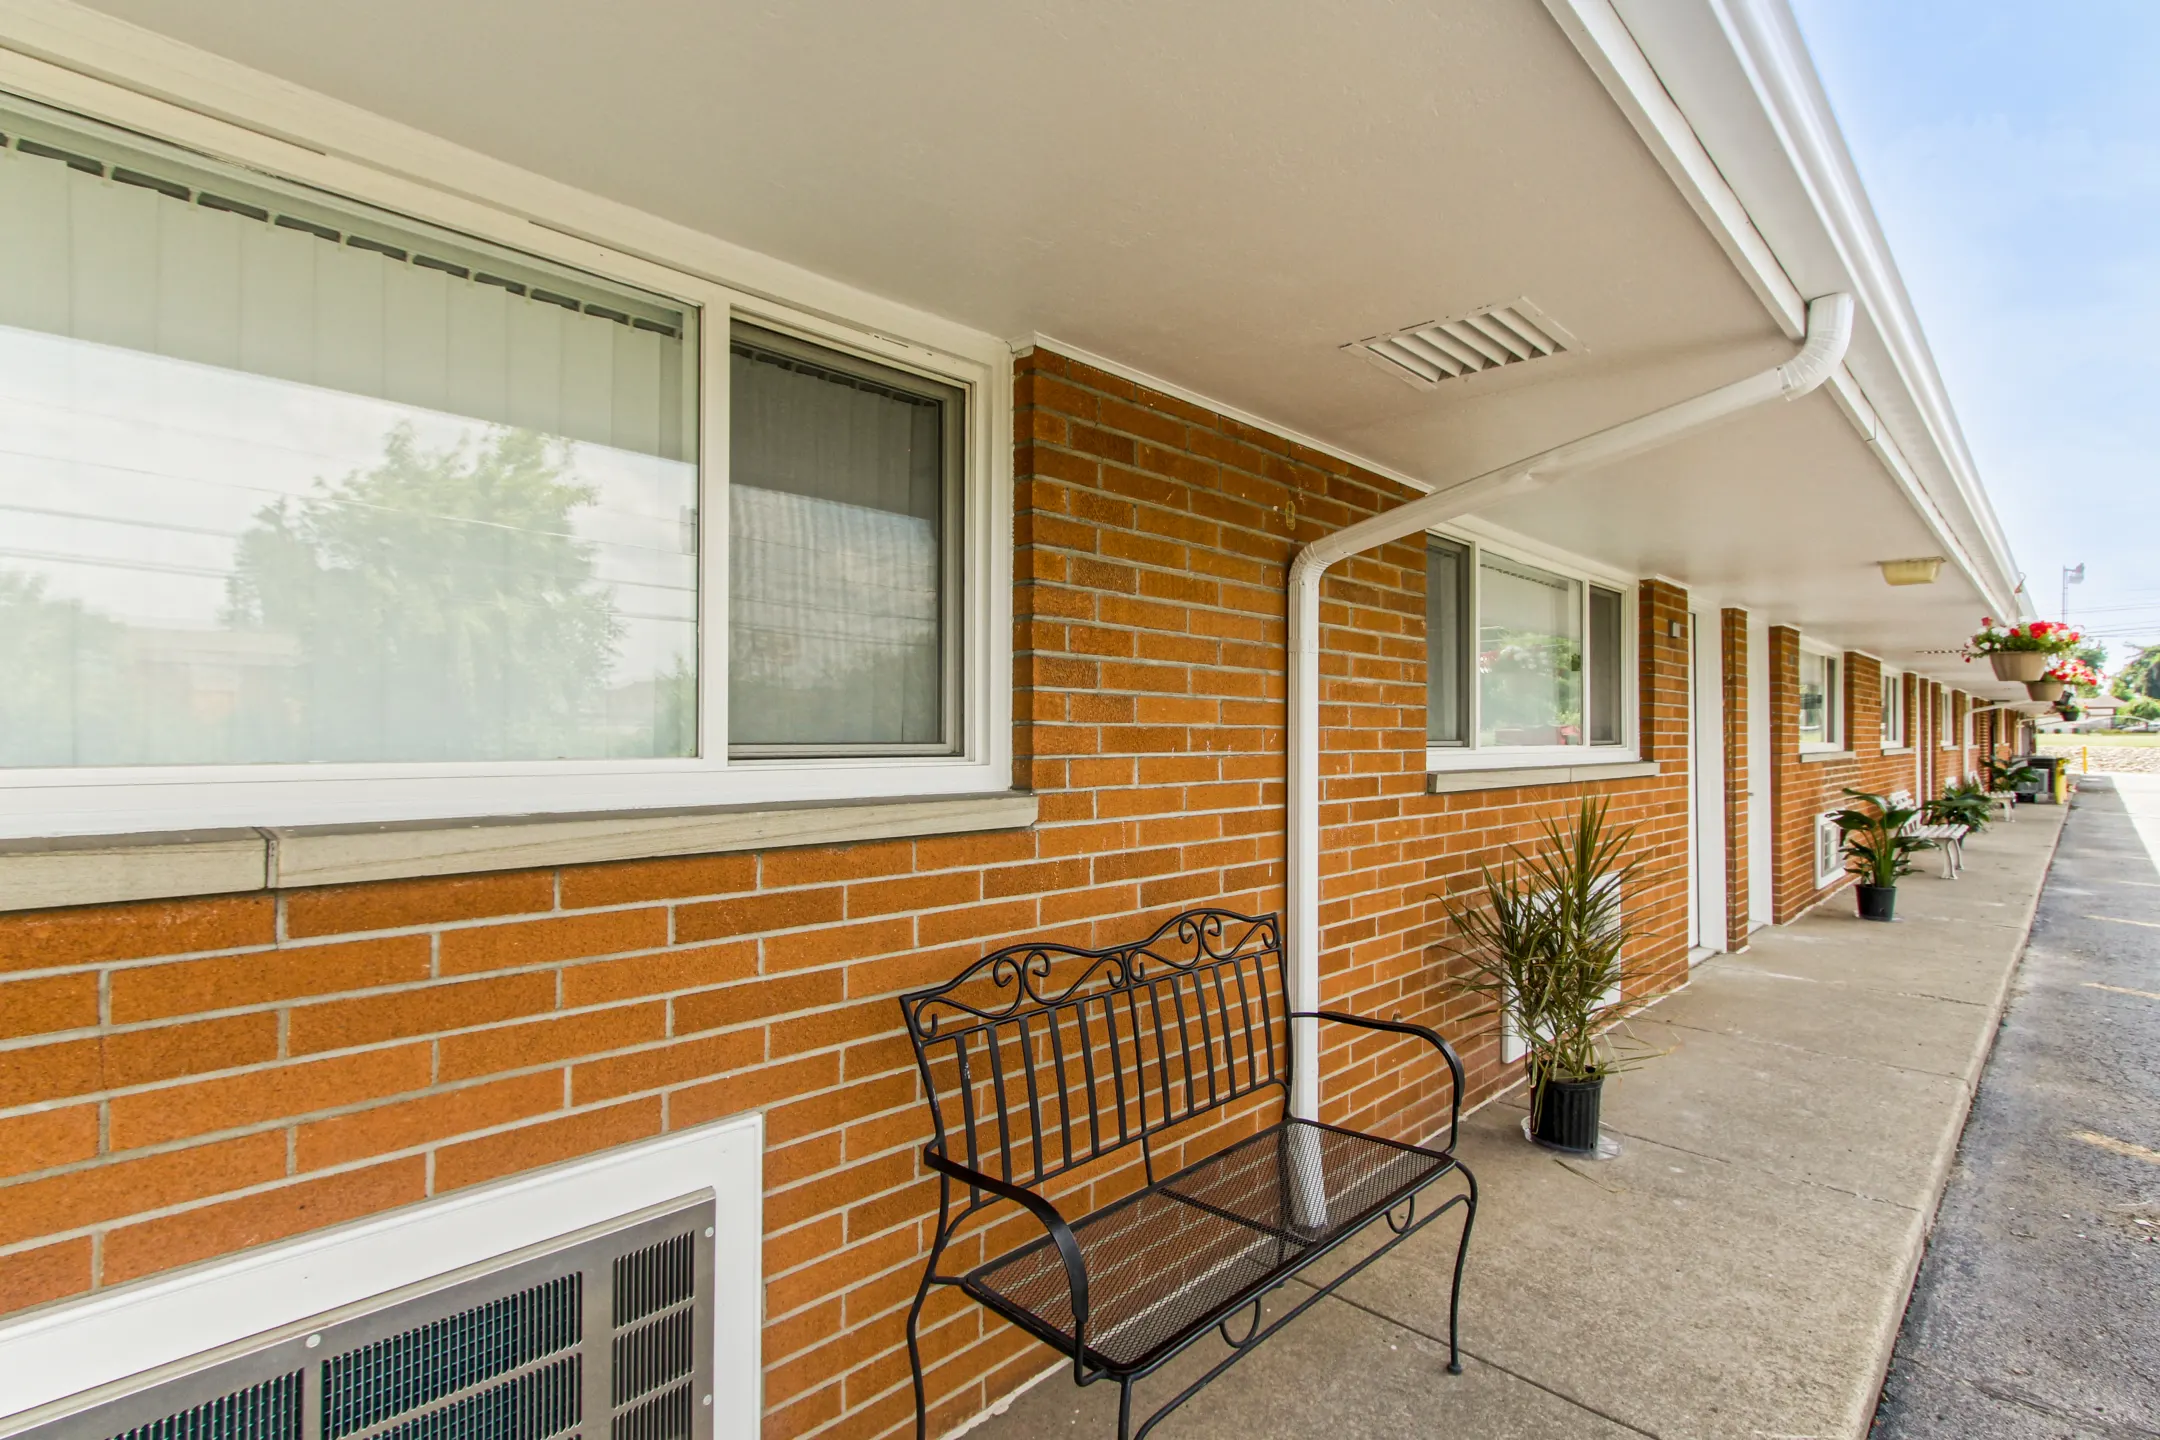 Patio / Deck - Woodworth Park Apartments - North Lima, OH